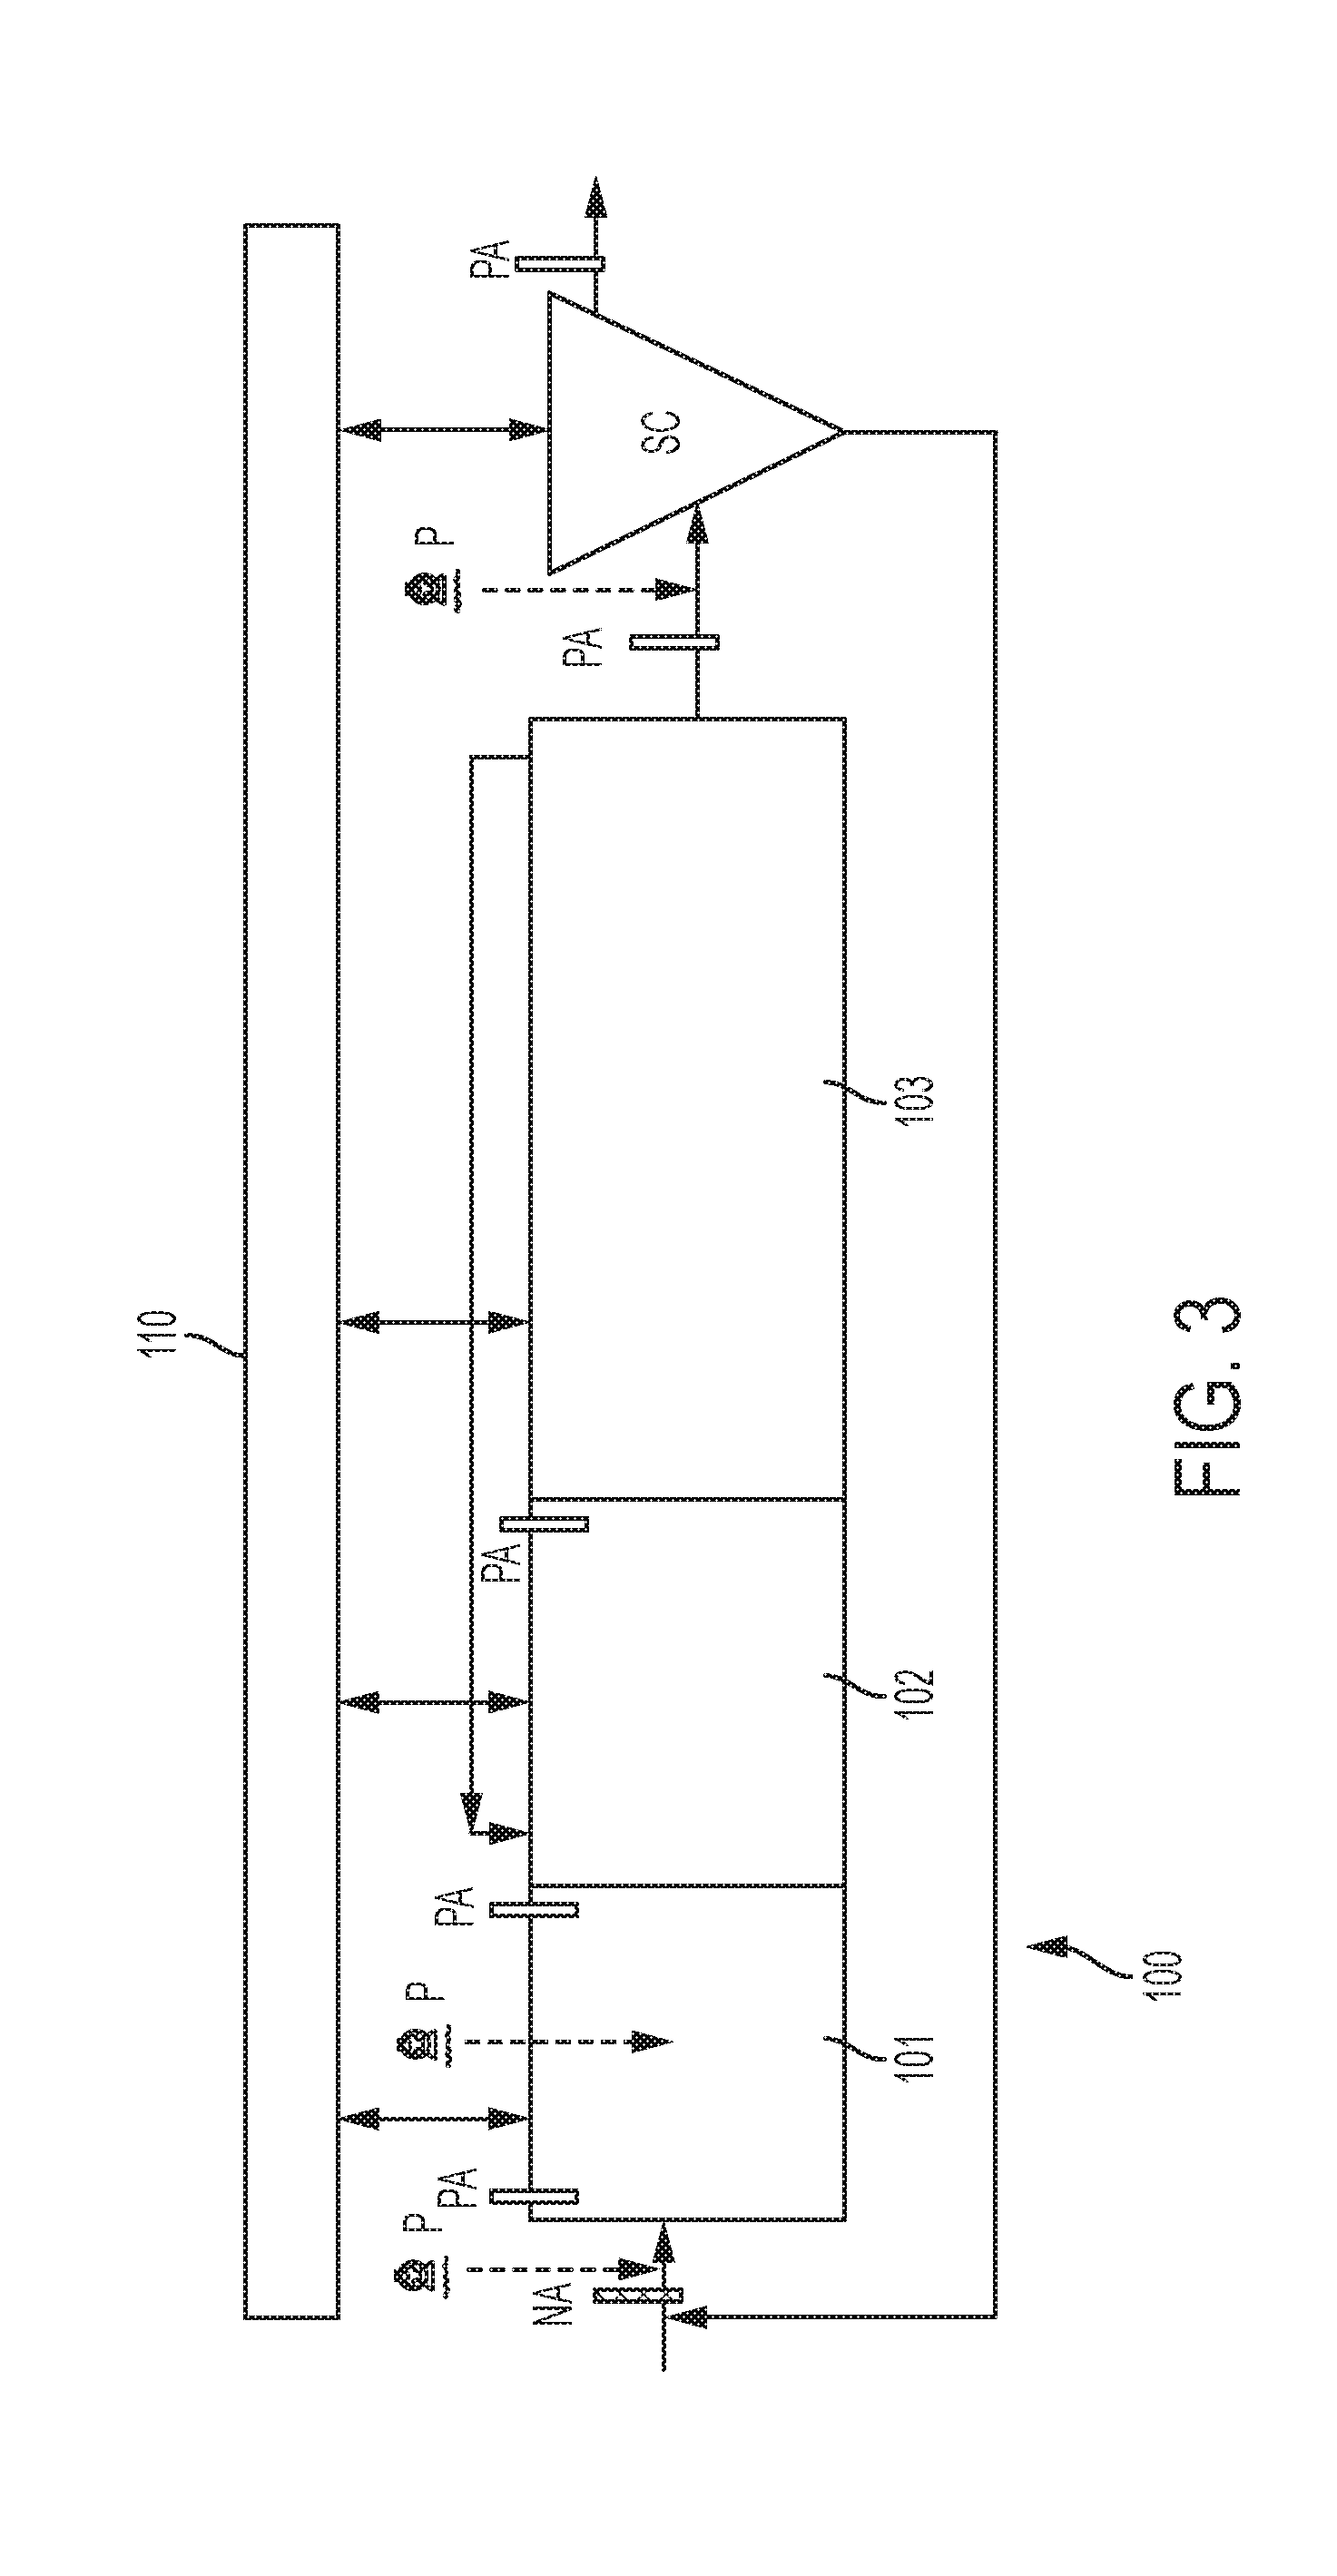 Control system for nitrogen and phosphorus removal